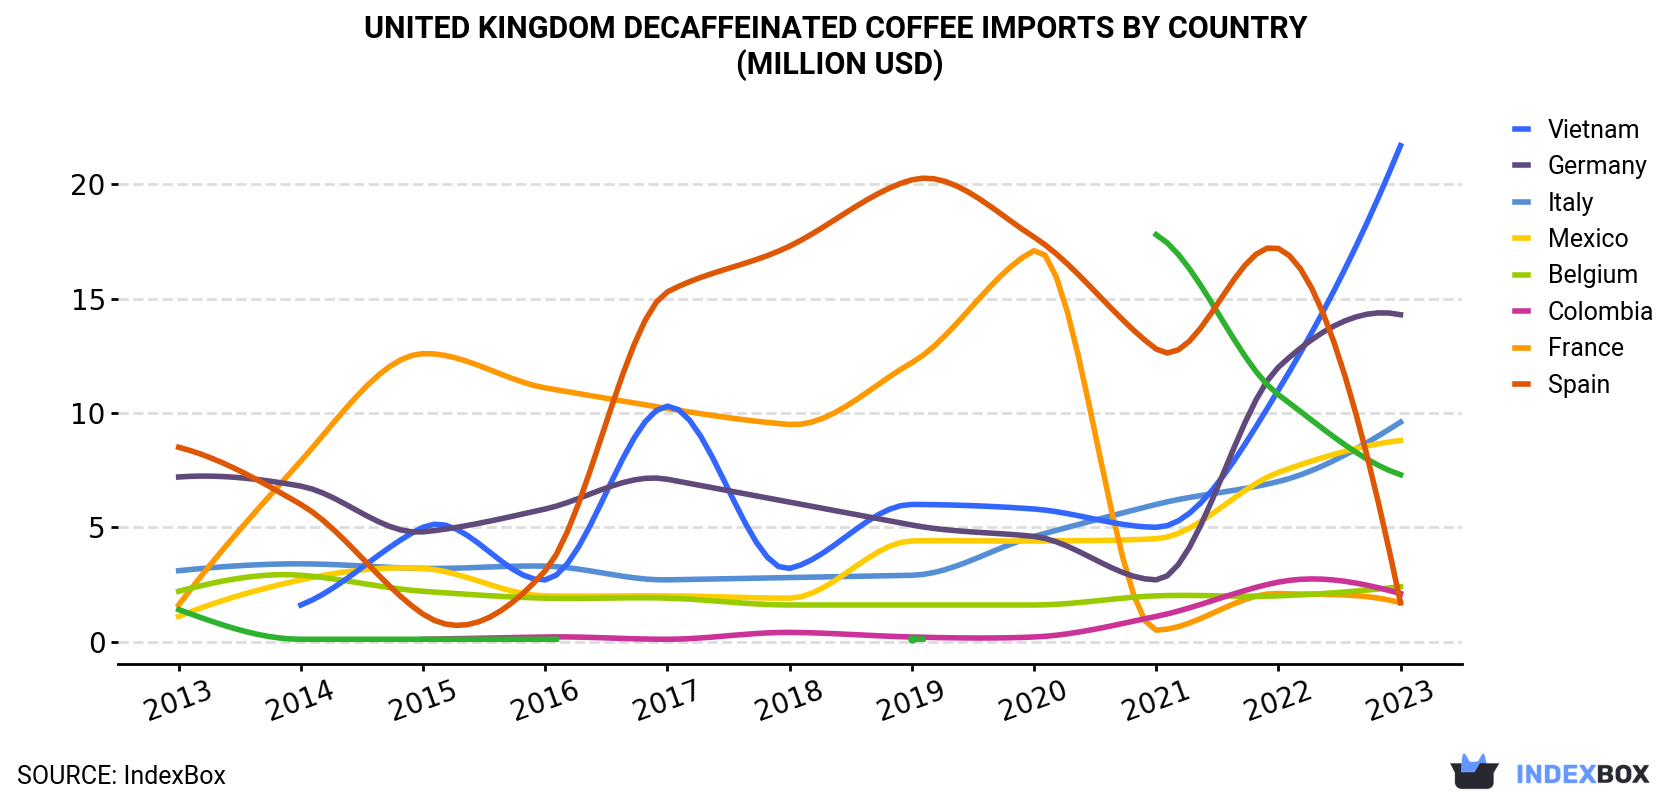 United Kingdom Decaffeinated Coffee Imports By Country (Million USD)